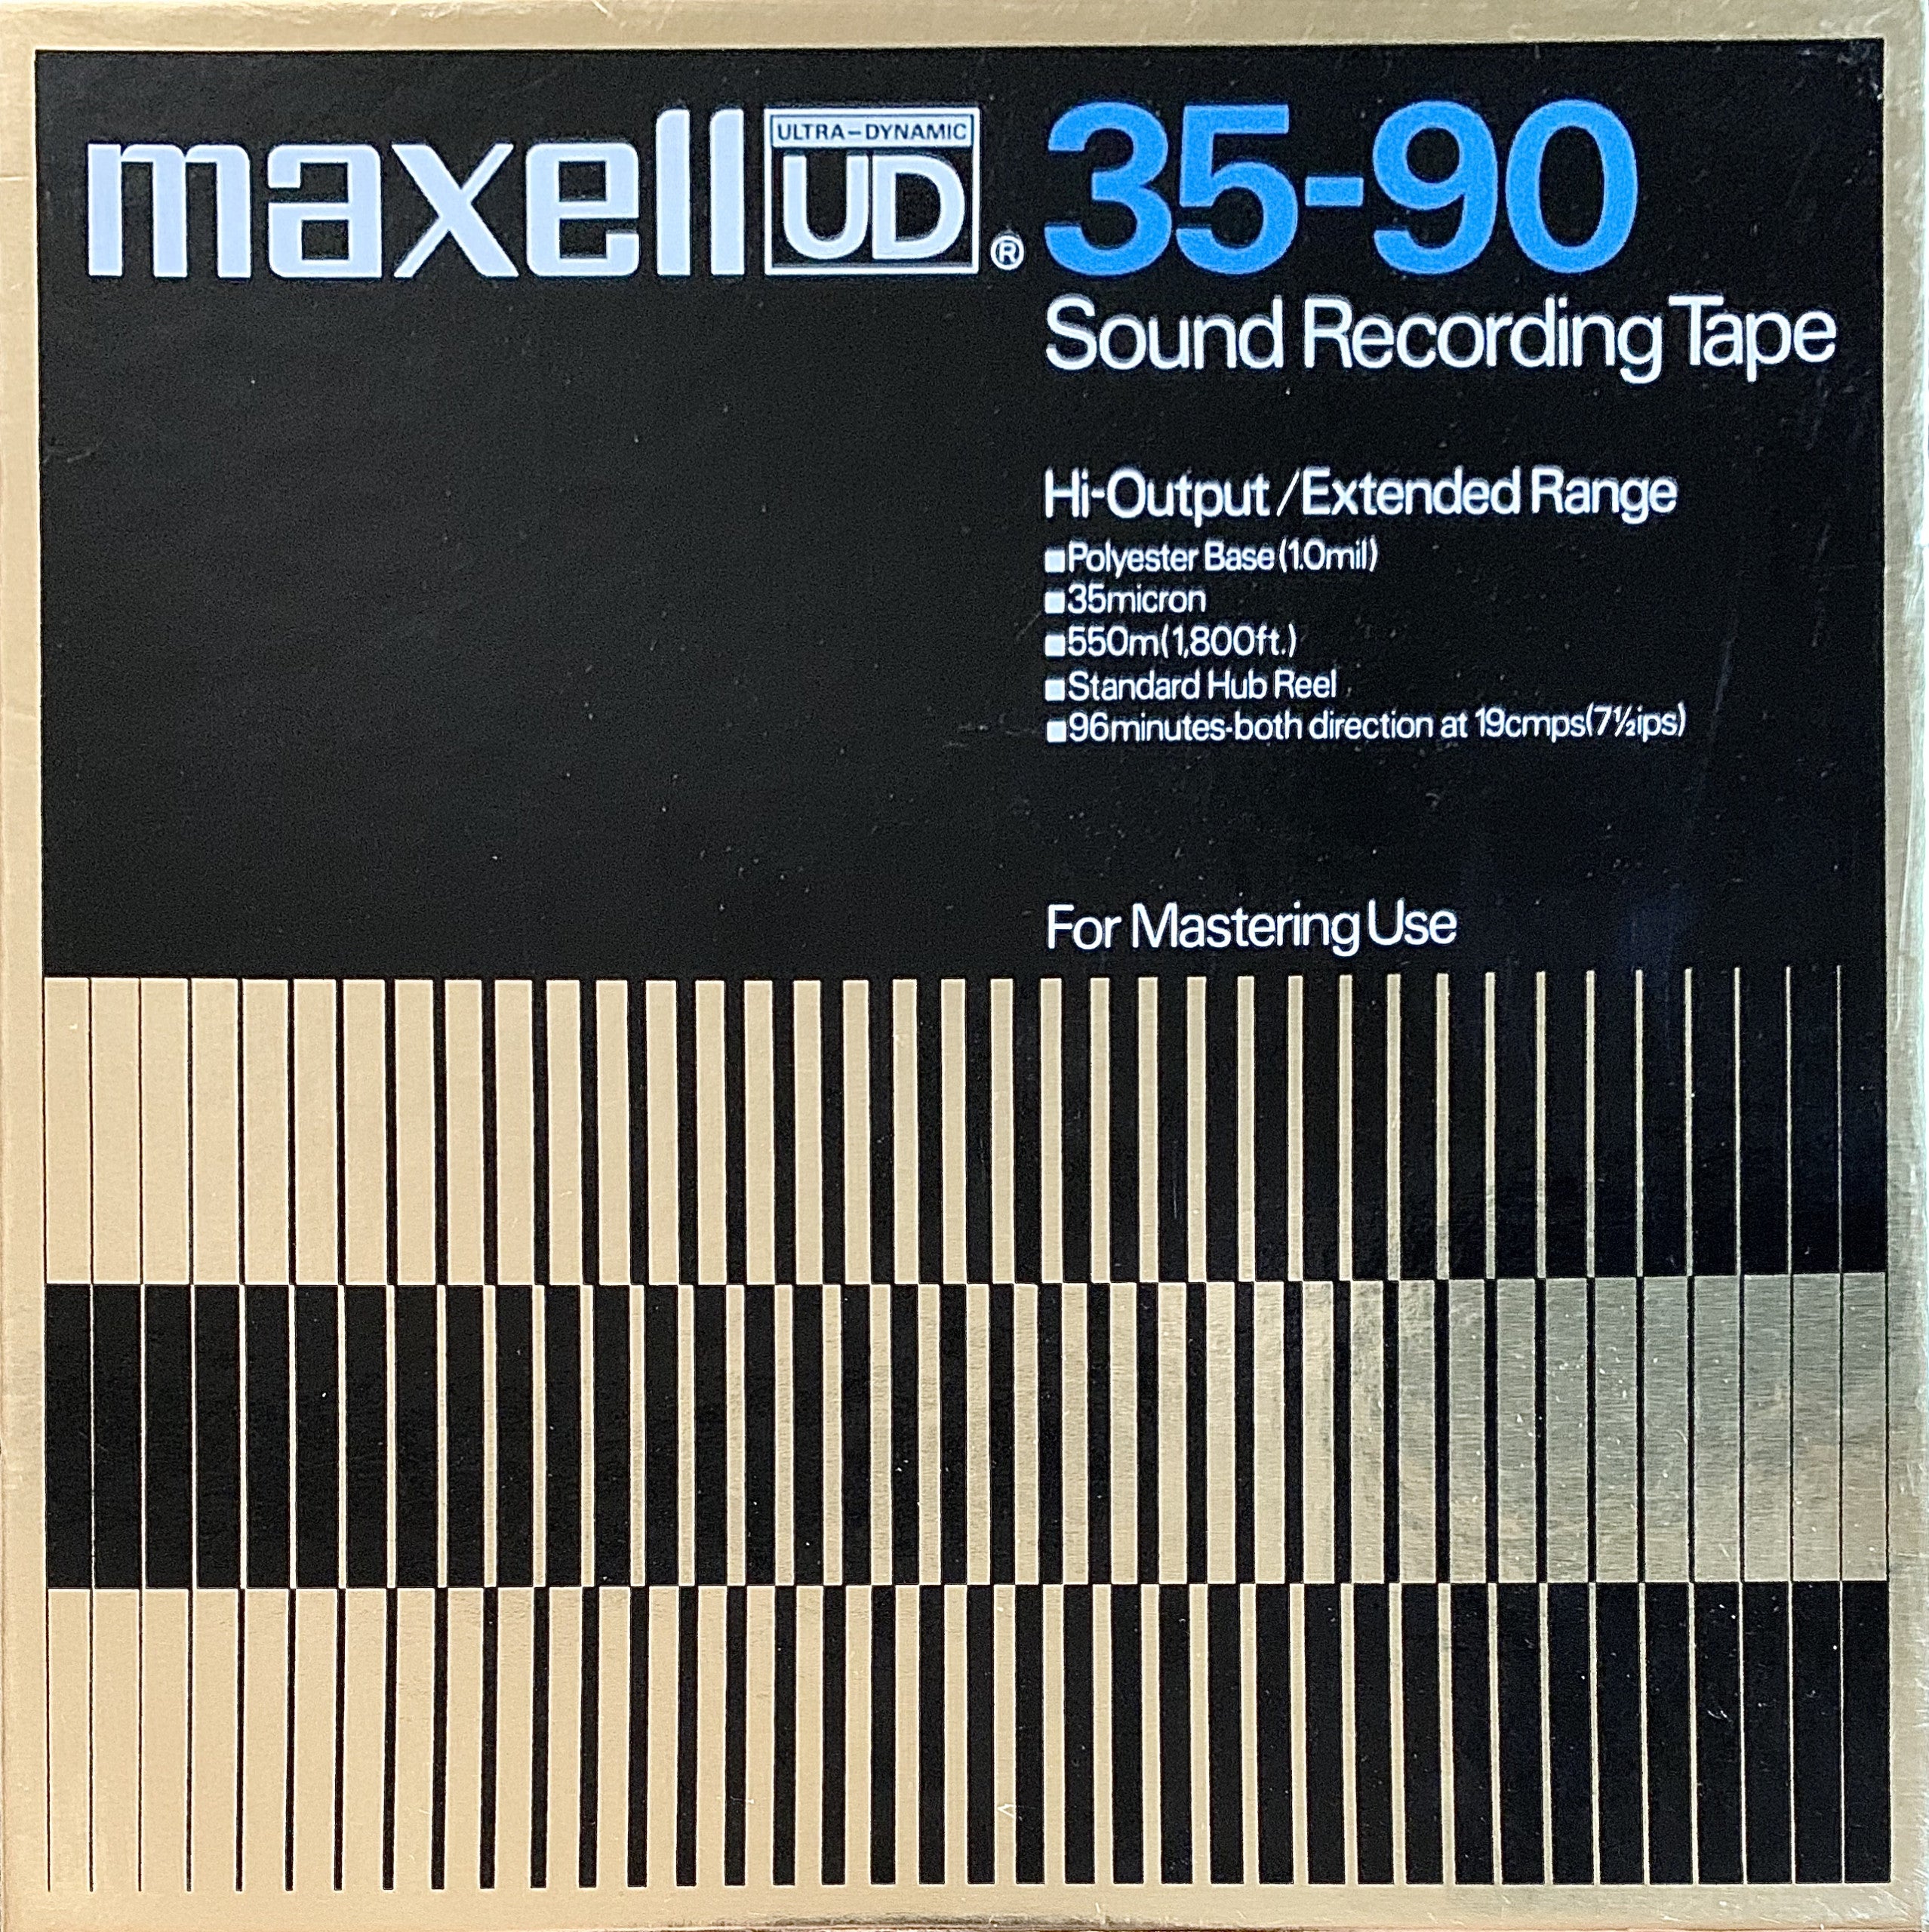 http://www.theturntablestore.com/cdn/shop/collections/Maxell-UD-35-90-Reel-Tape-Box-scaled.jpg?v=1704232578